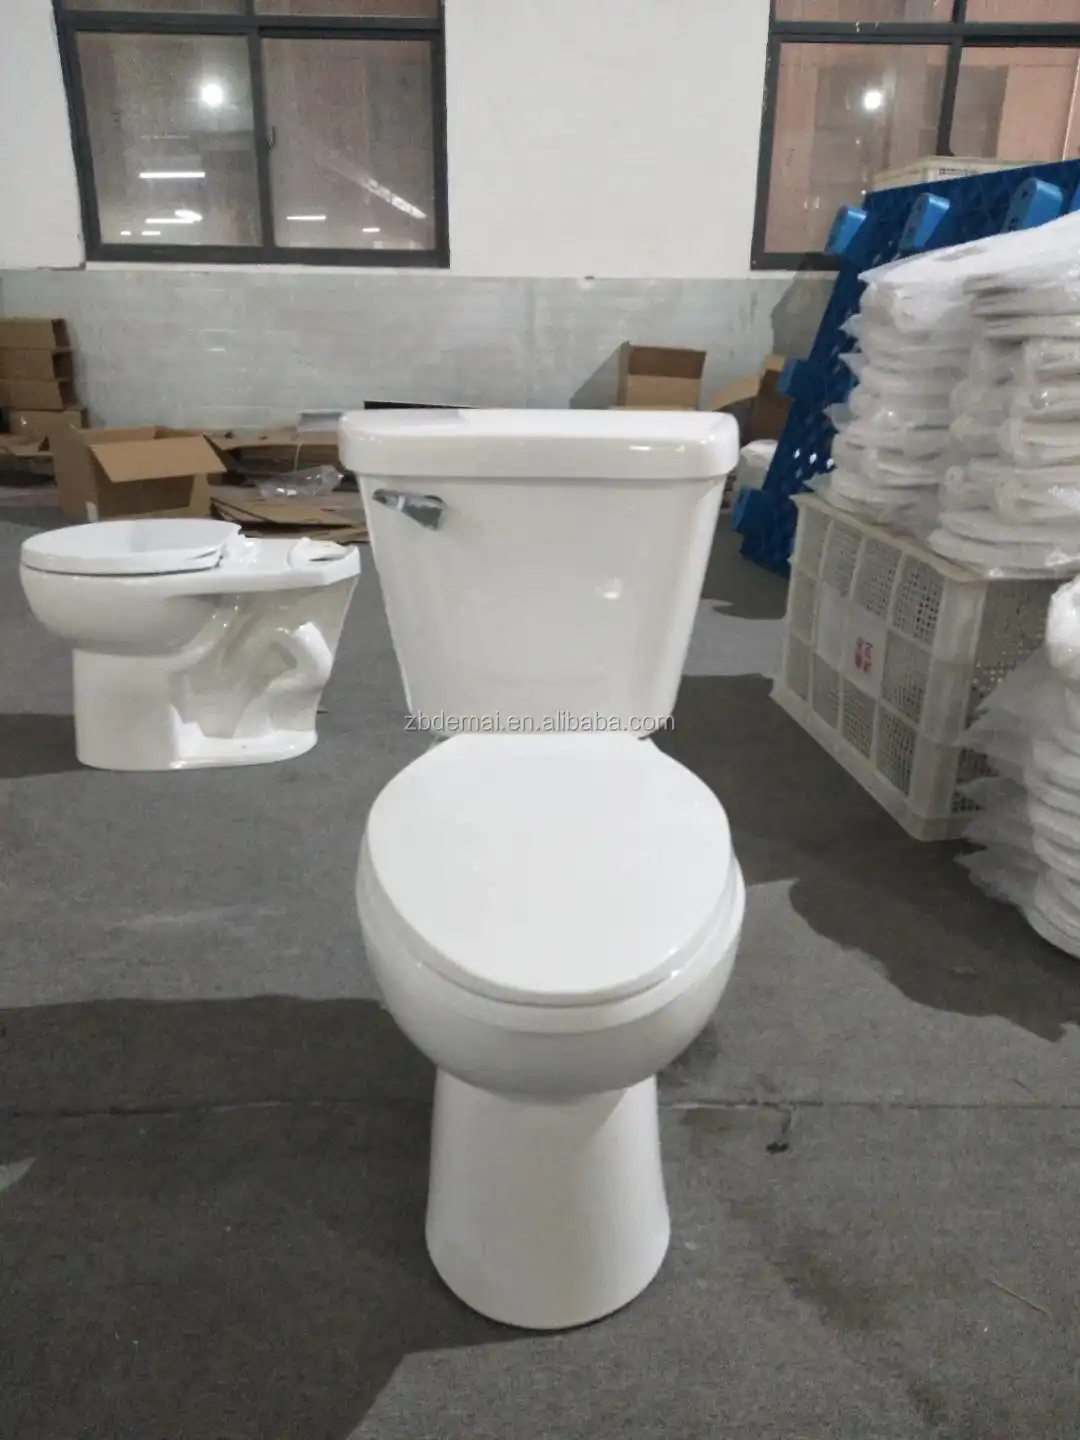 vertraging documentaire Trouw Dmt57.58.59 Quality Two Piece Toilet Bowl And Tank Of S-trap Of Sanitary  Ware In Good Price - Buy Quality Two Piece Toilet Set Bowl With Tank S-trap  Of Sanitary Ware,Two Piece Toilet